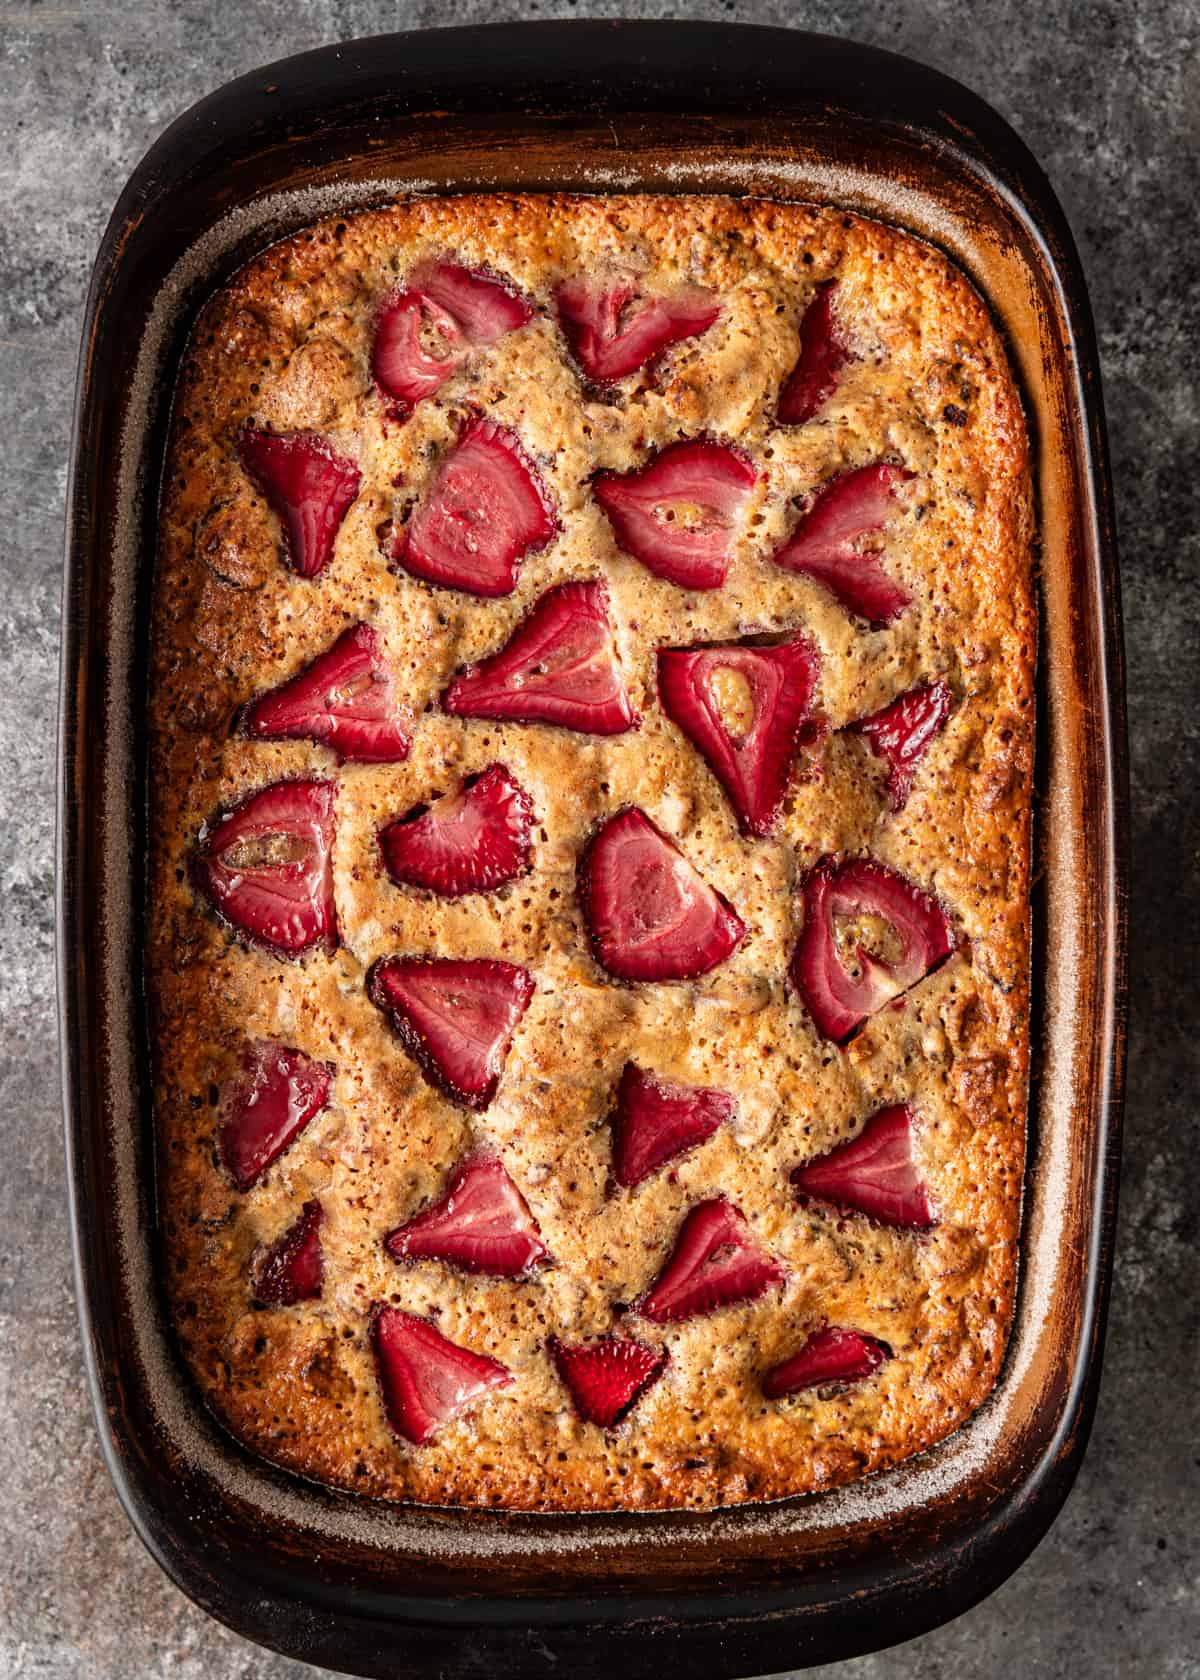 overhead: baked cornmeal cake with strawberries showing